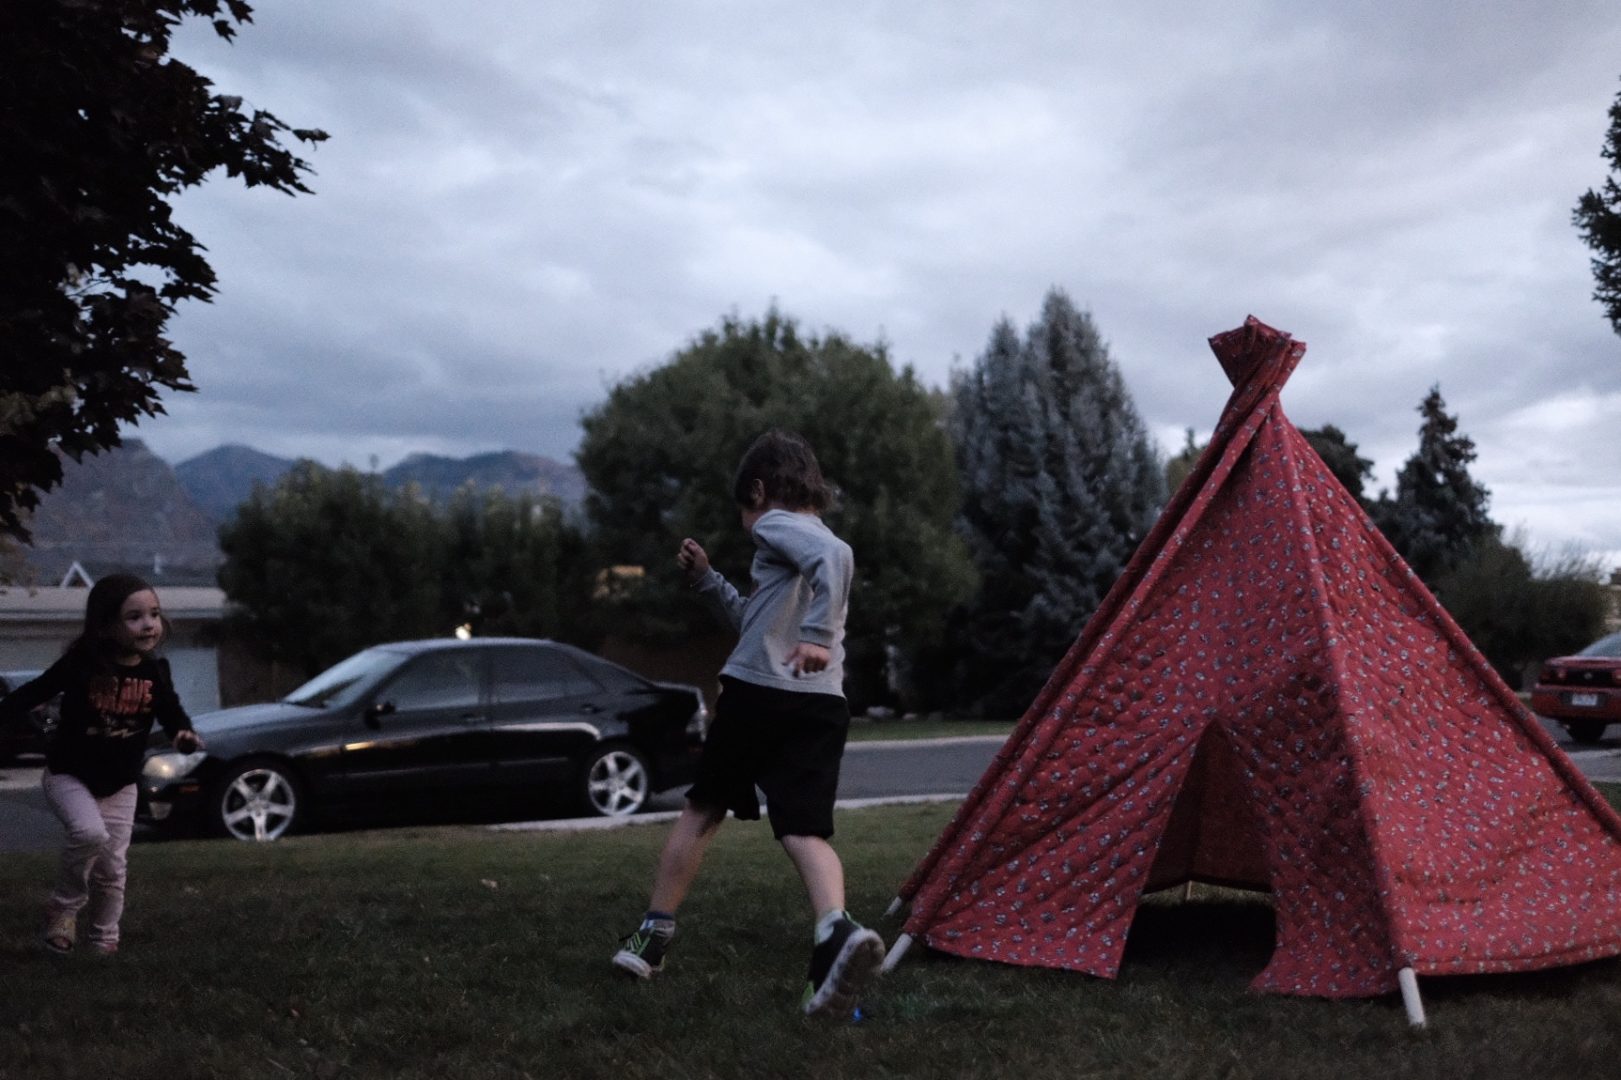 Two kids run around a teepee set up on the front lawn.